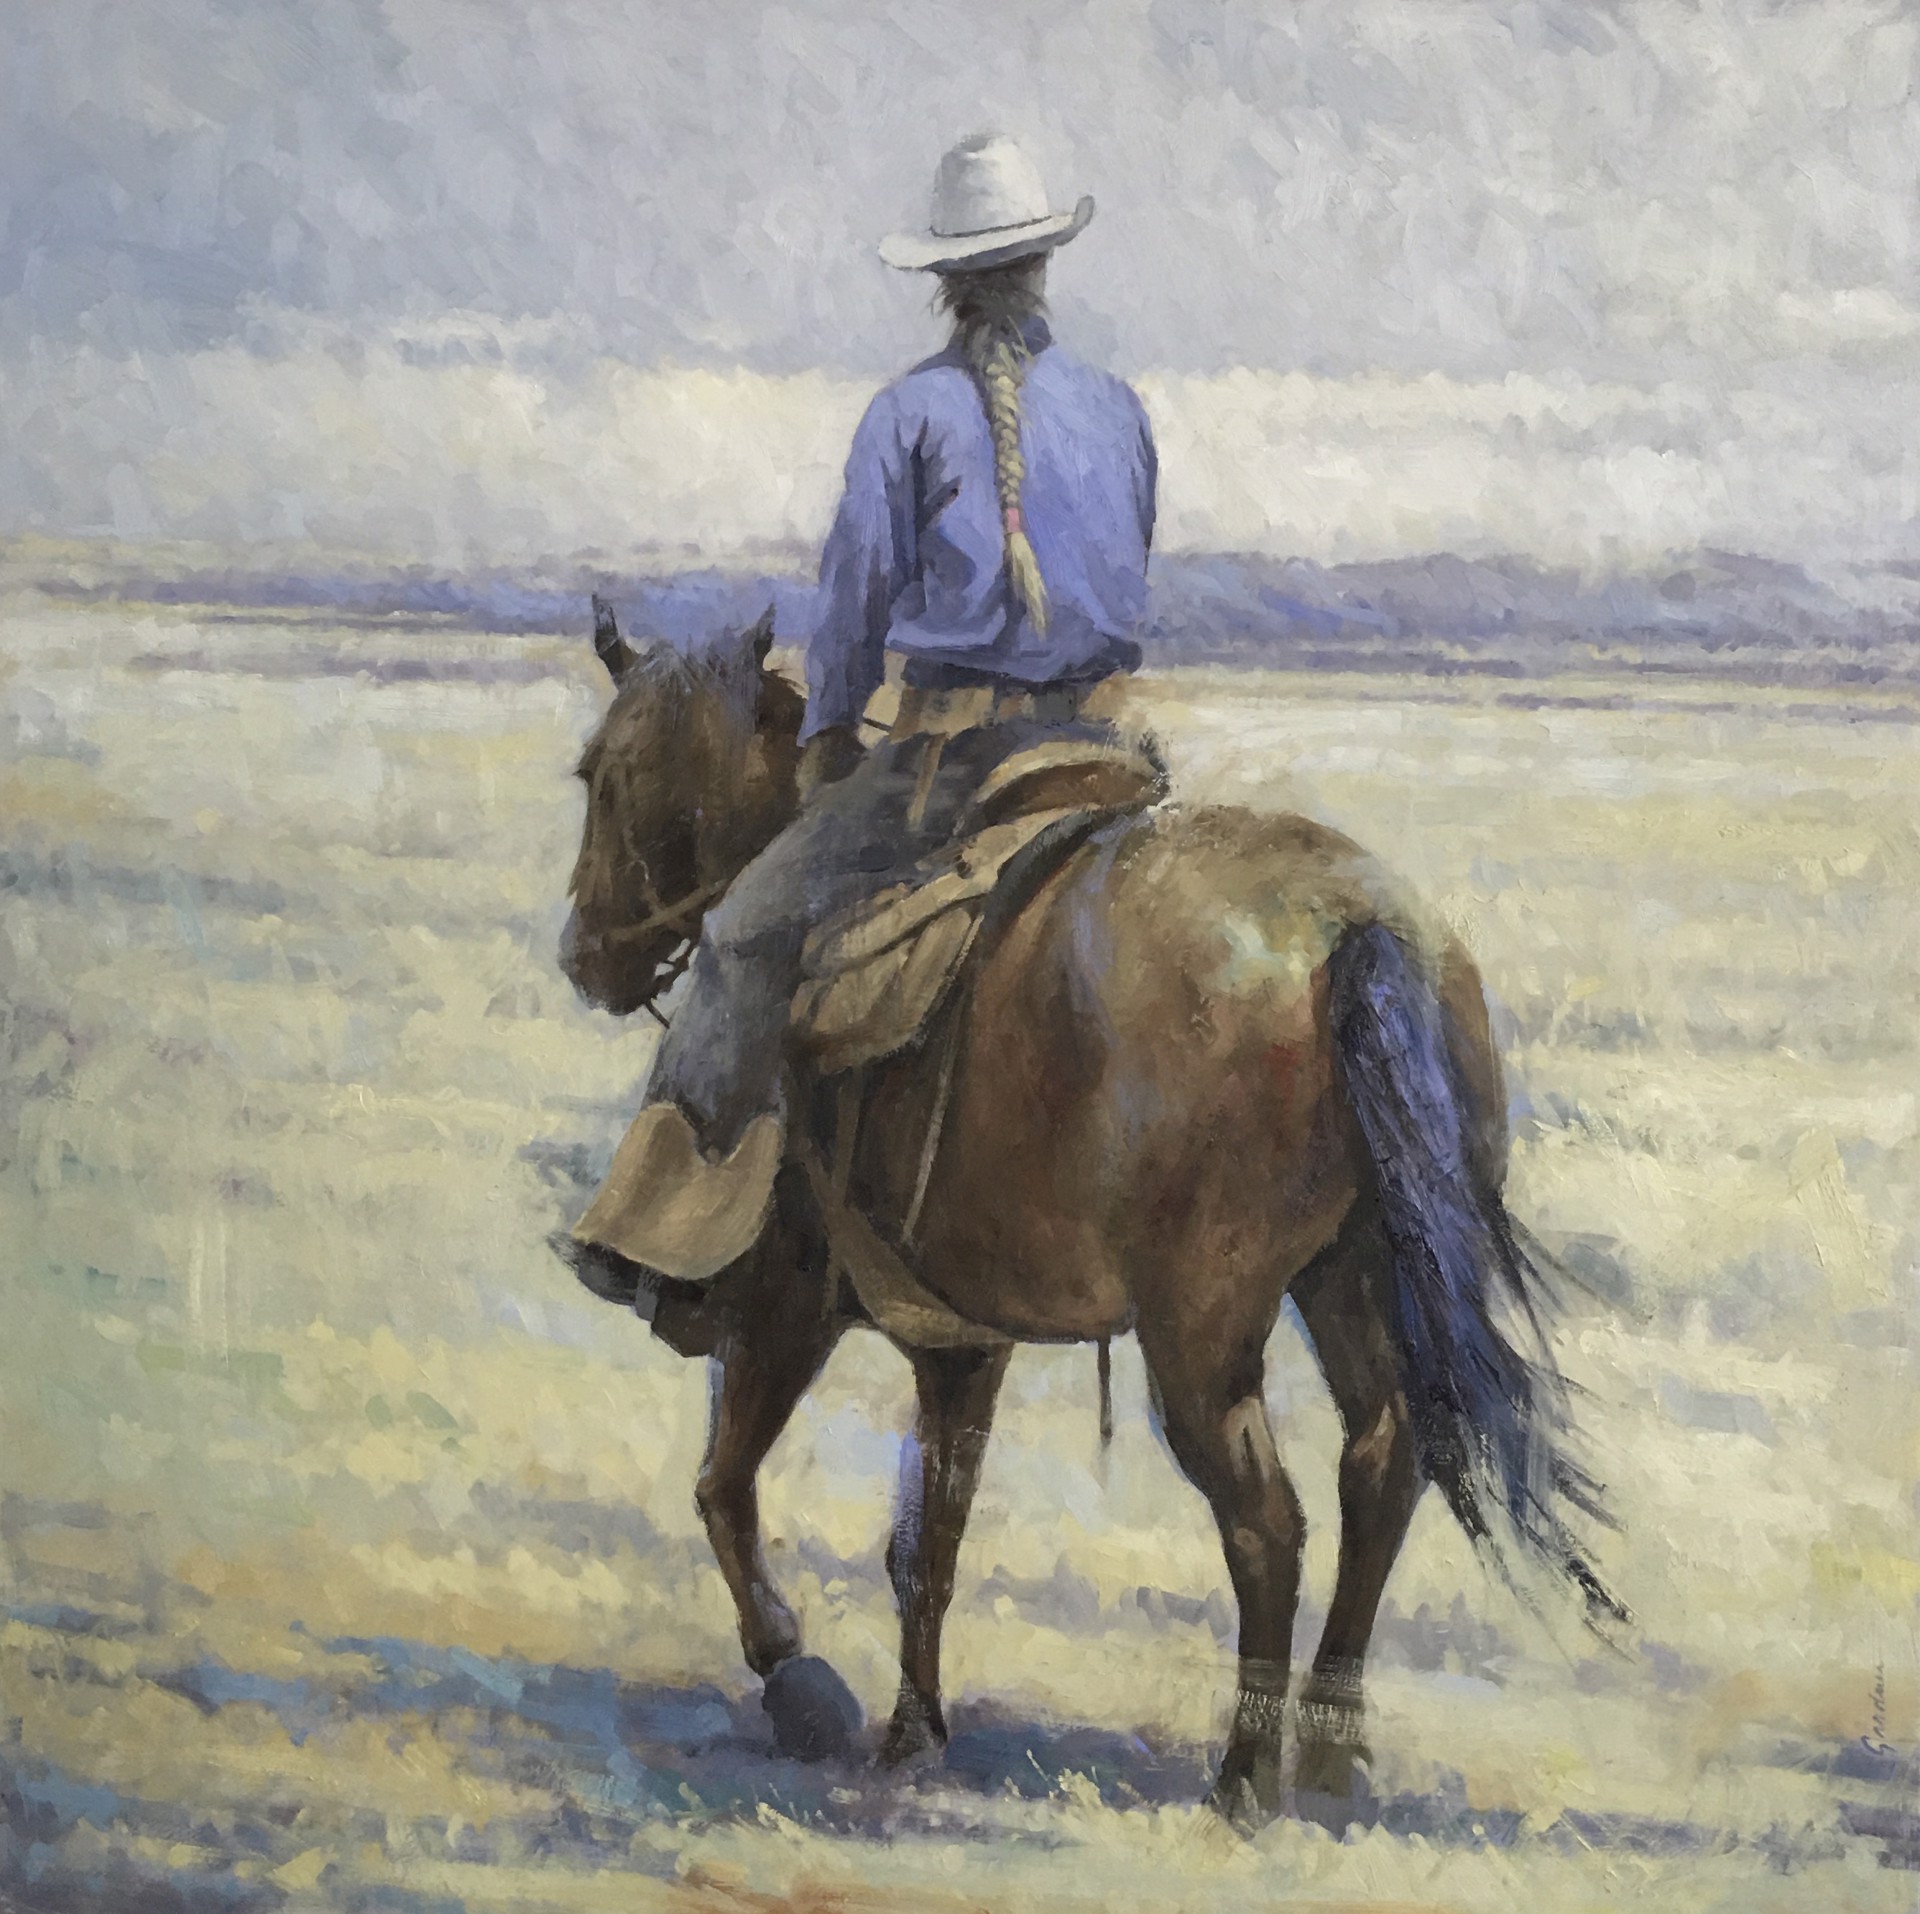 The Range of the Cowgirl by Terry Gardner